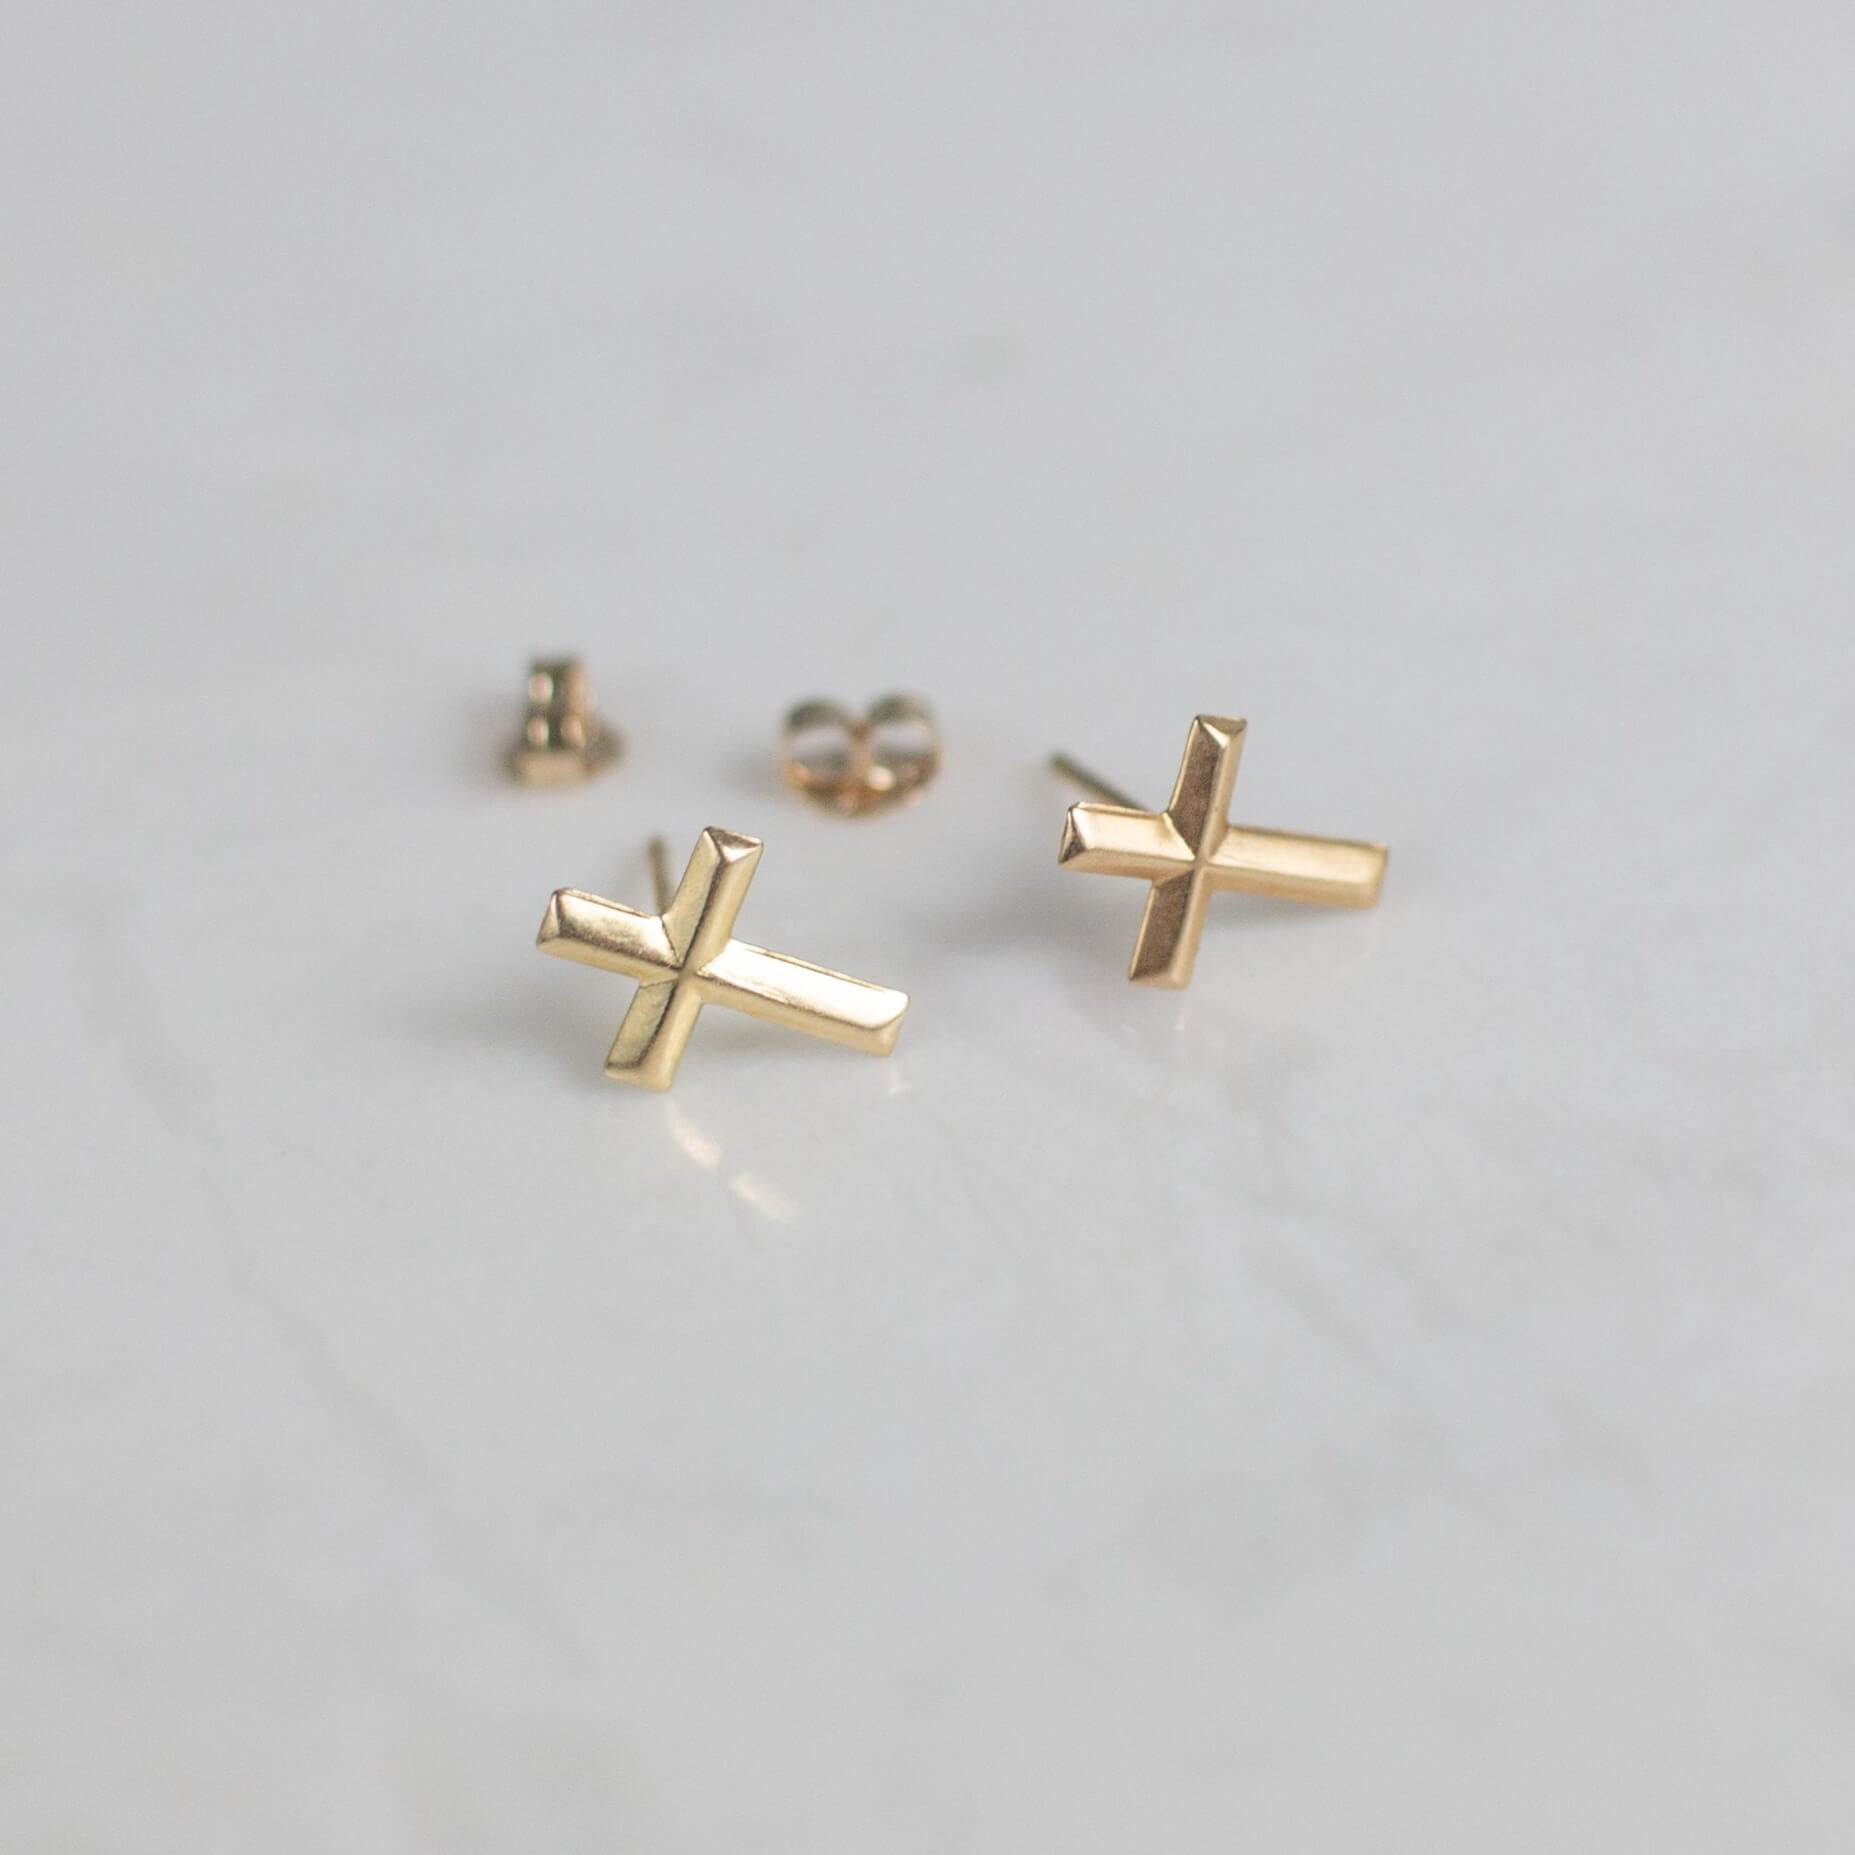 solid gold cross earrings by good wknd